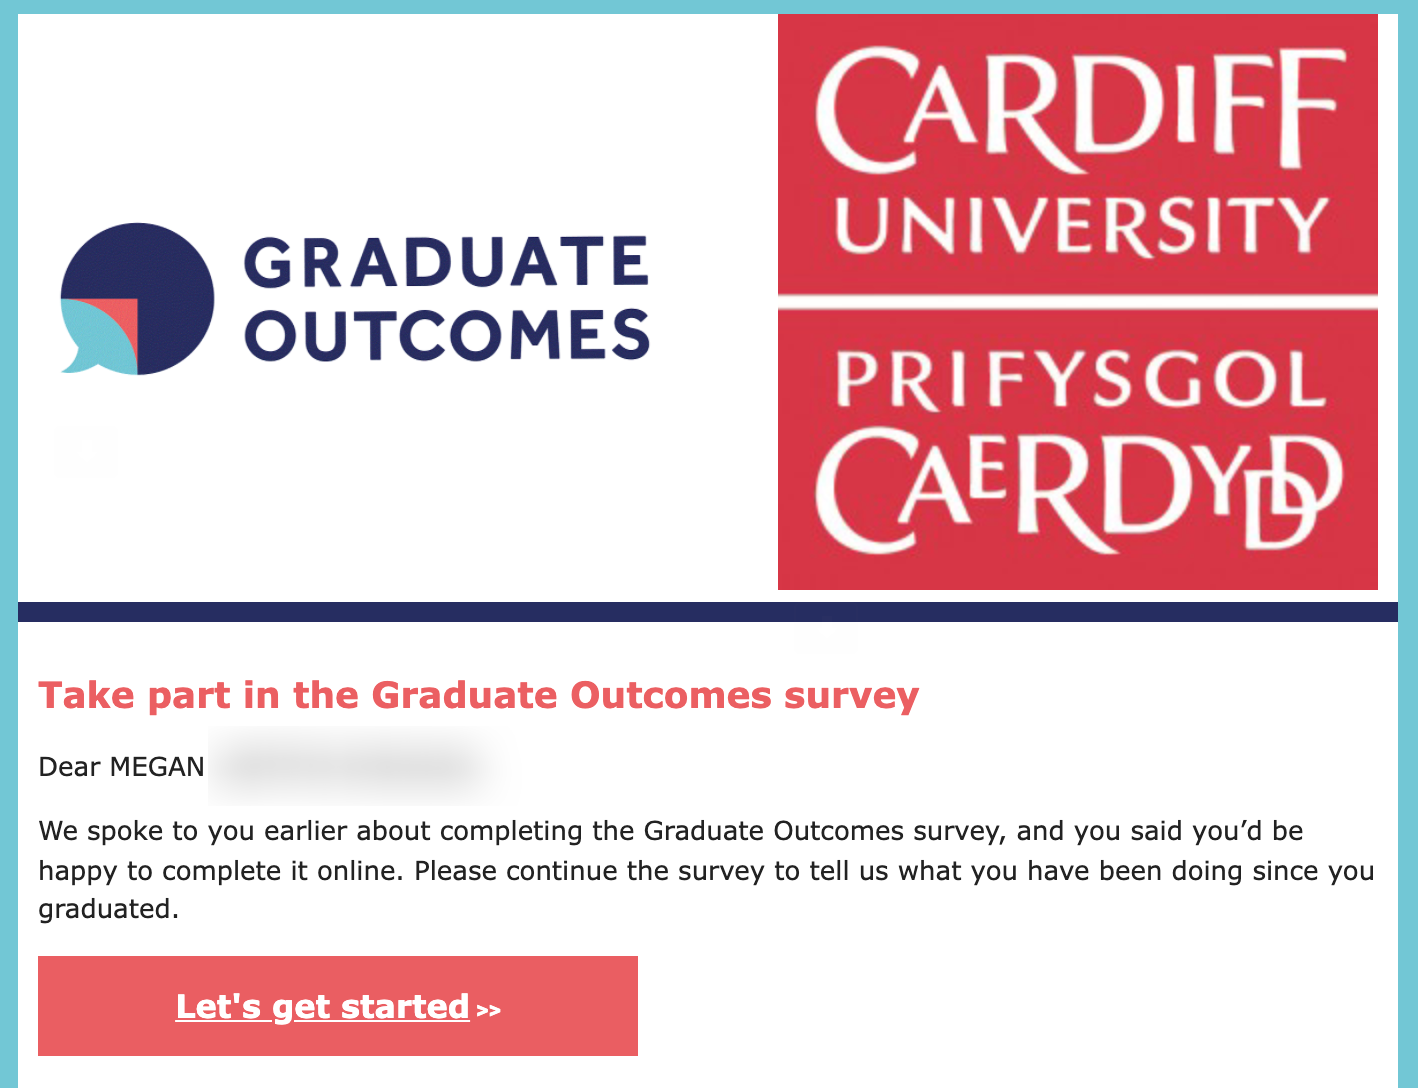 Graduate outcomes survey email example